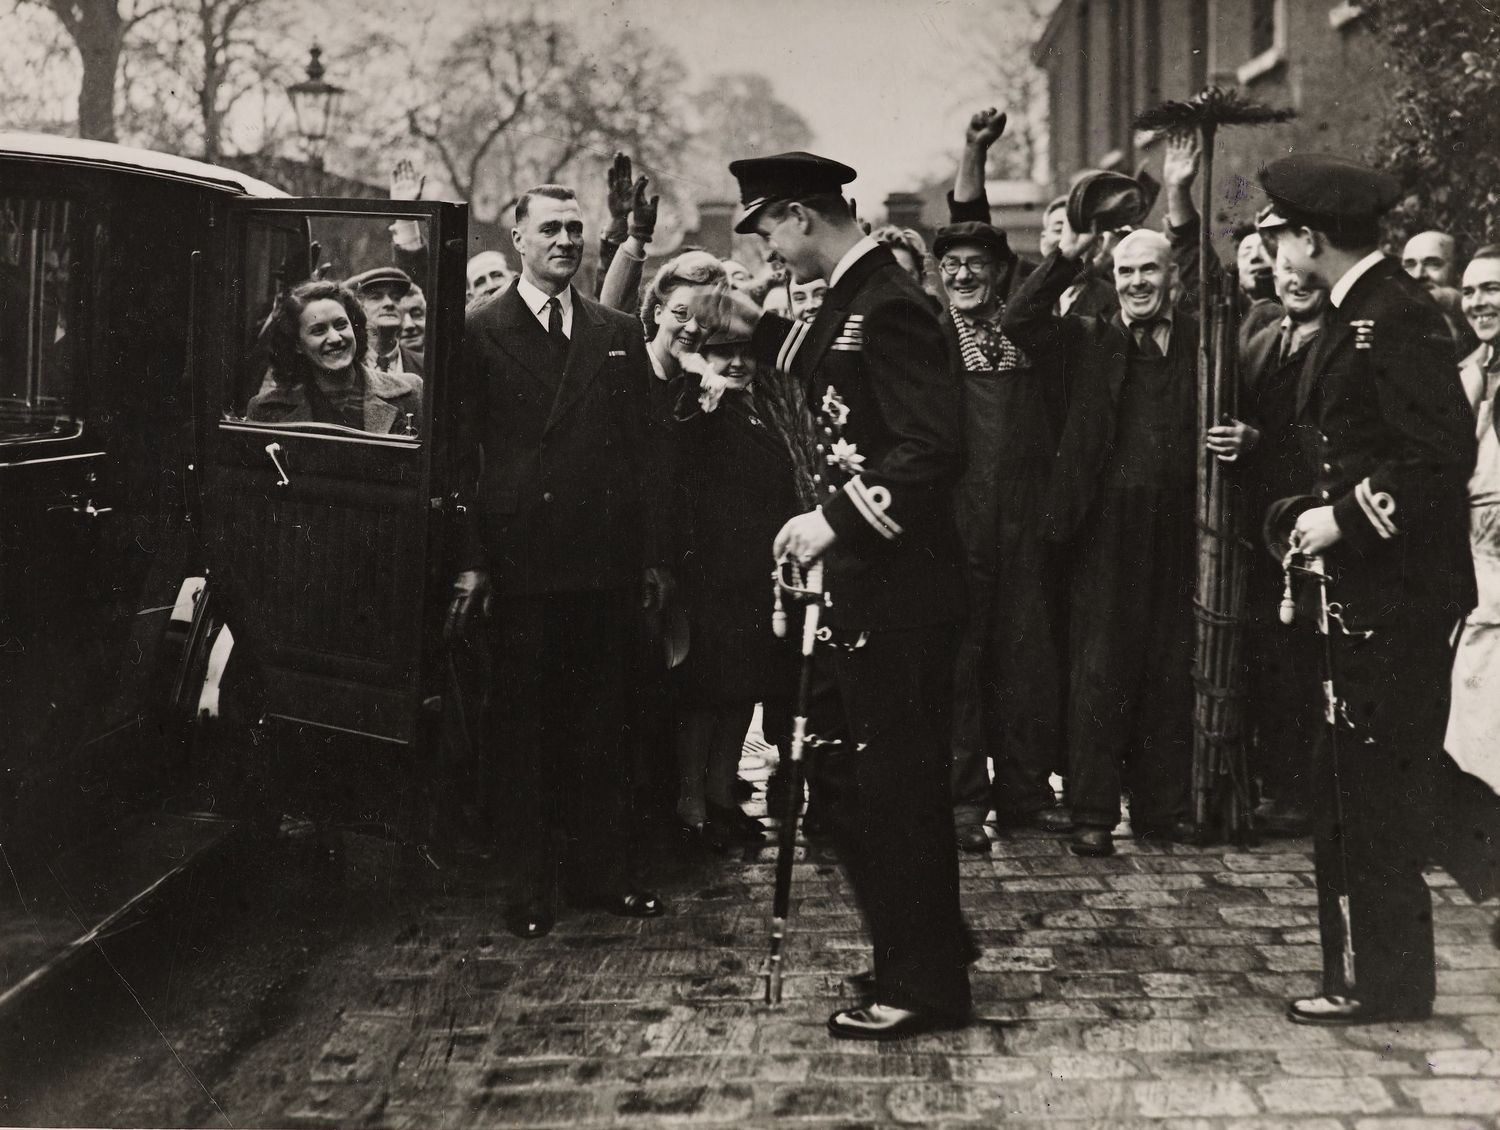 Photograph of Lieutenant Philip Mountbatten (b. 1921), later HRH The Duke of Edinburgh,&nbsp;leaving&nbsp;Kensington Palace on his wedding day.&nbsp;His groomsman David Mountbatten, Marquess of Milford Haven (1919-70) is standing behind him and a group of